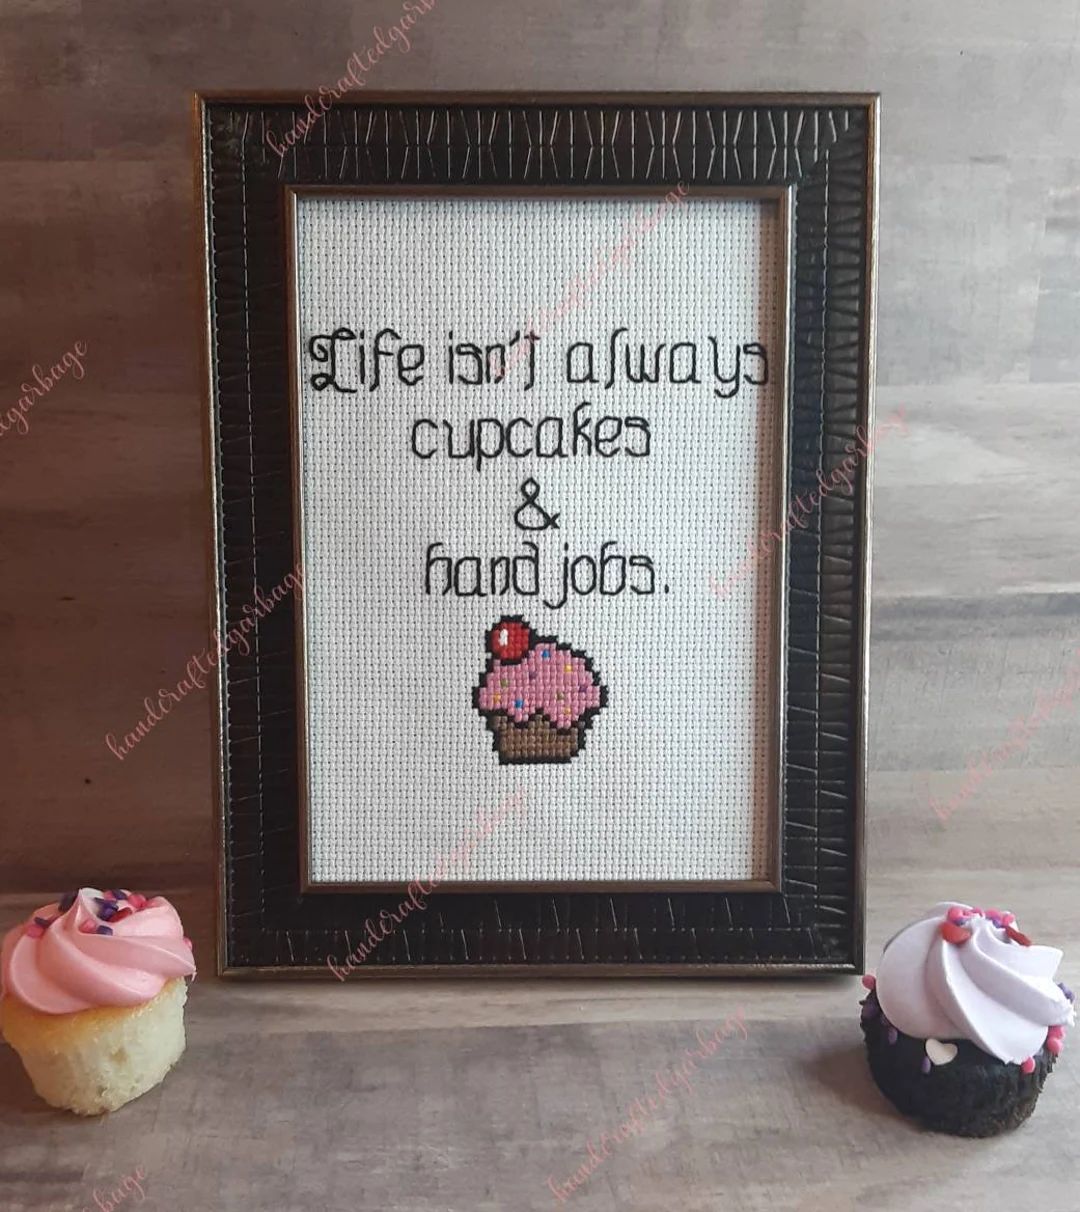 Life Isn't Always Cupcakes and Handjobs. Finished and - Etsy | Etsy (US)